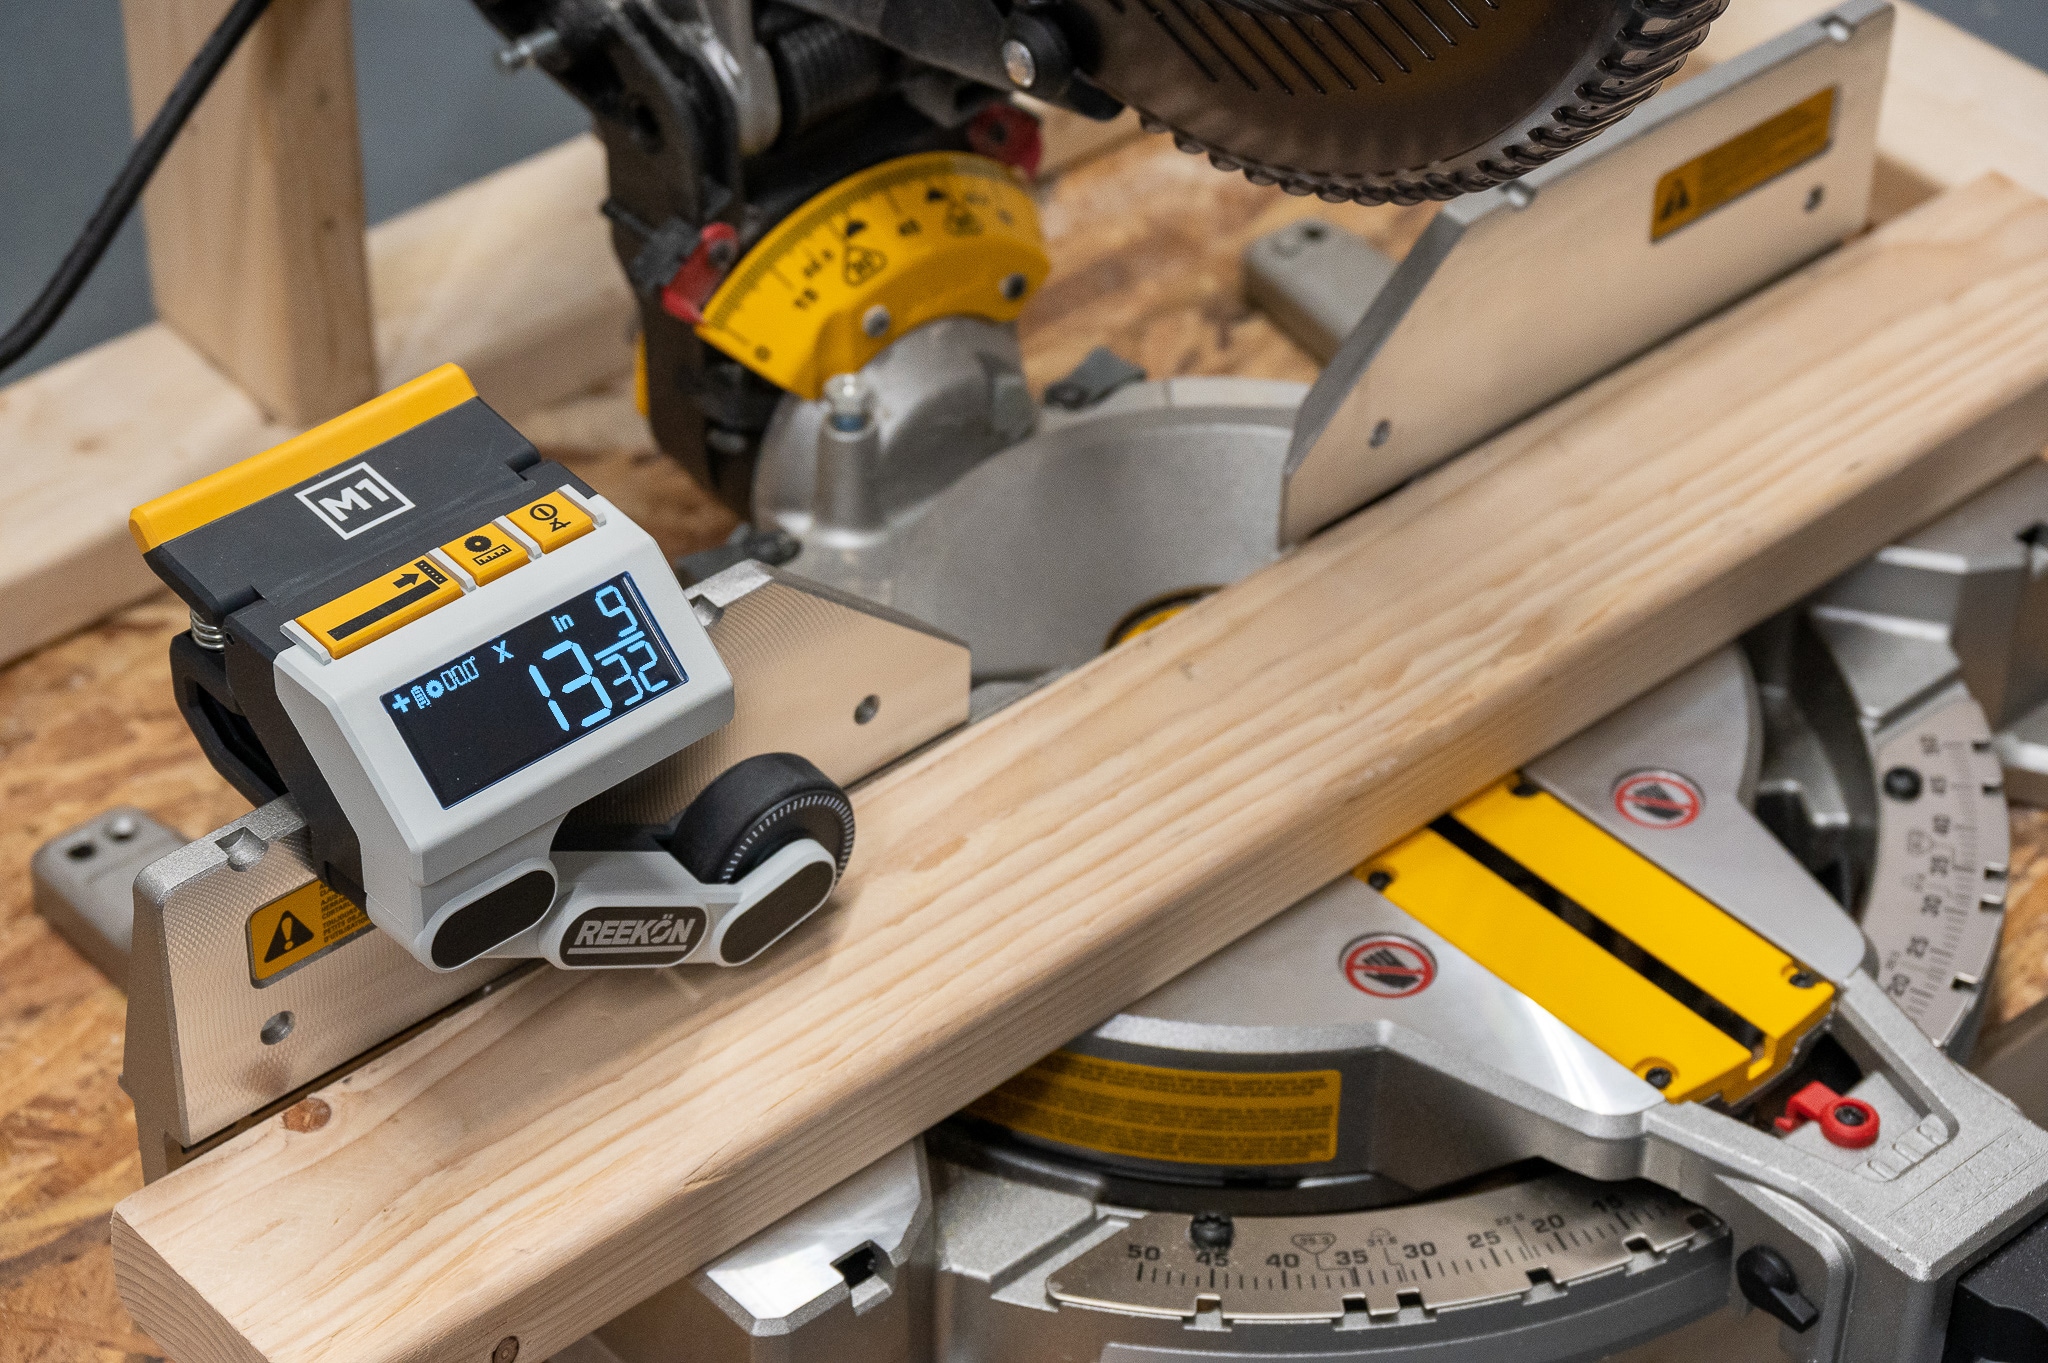 REEKON M1 Caliber Measuring Tool for Miter Saws – Eliminates Need to Measure  & Mark Materials, Reduces Cut Time and Increases Safety, Measures Flat &  Round Materials: : Tools & Home Improvement